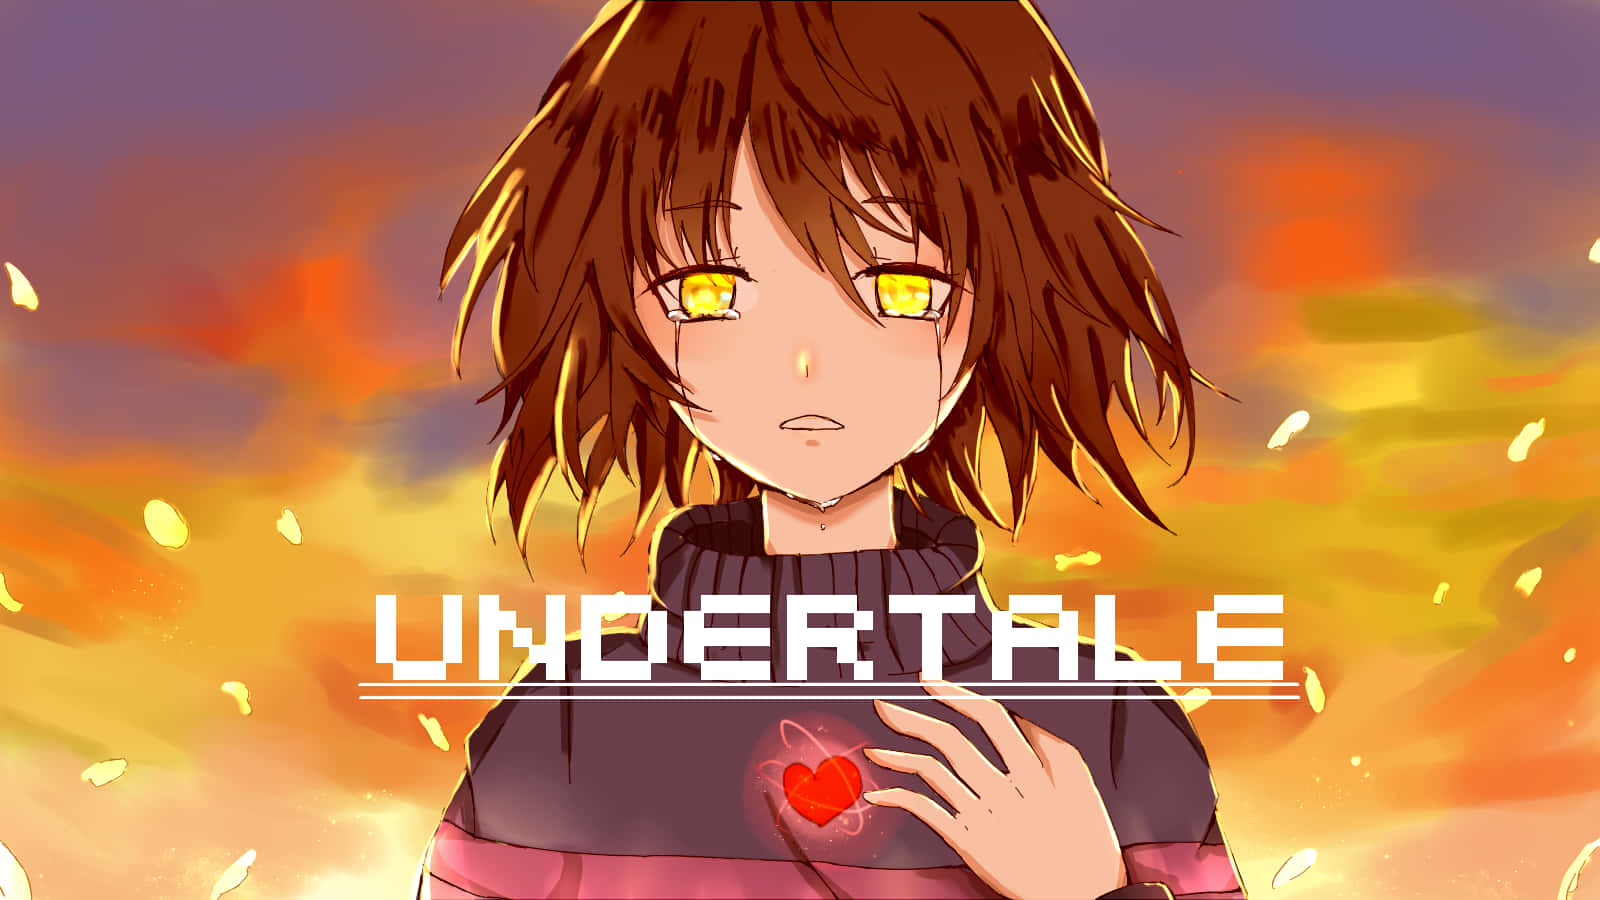 "Adventure Awaits - Frisk Determined To Explore The Undertale World" Wallpaper